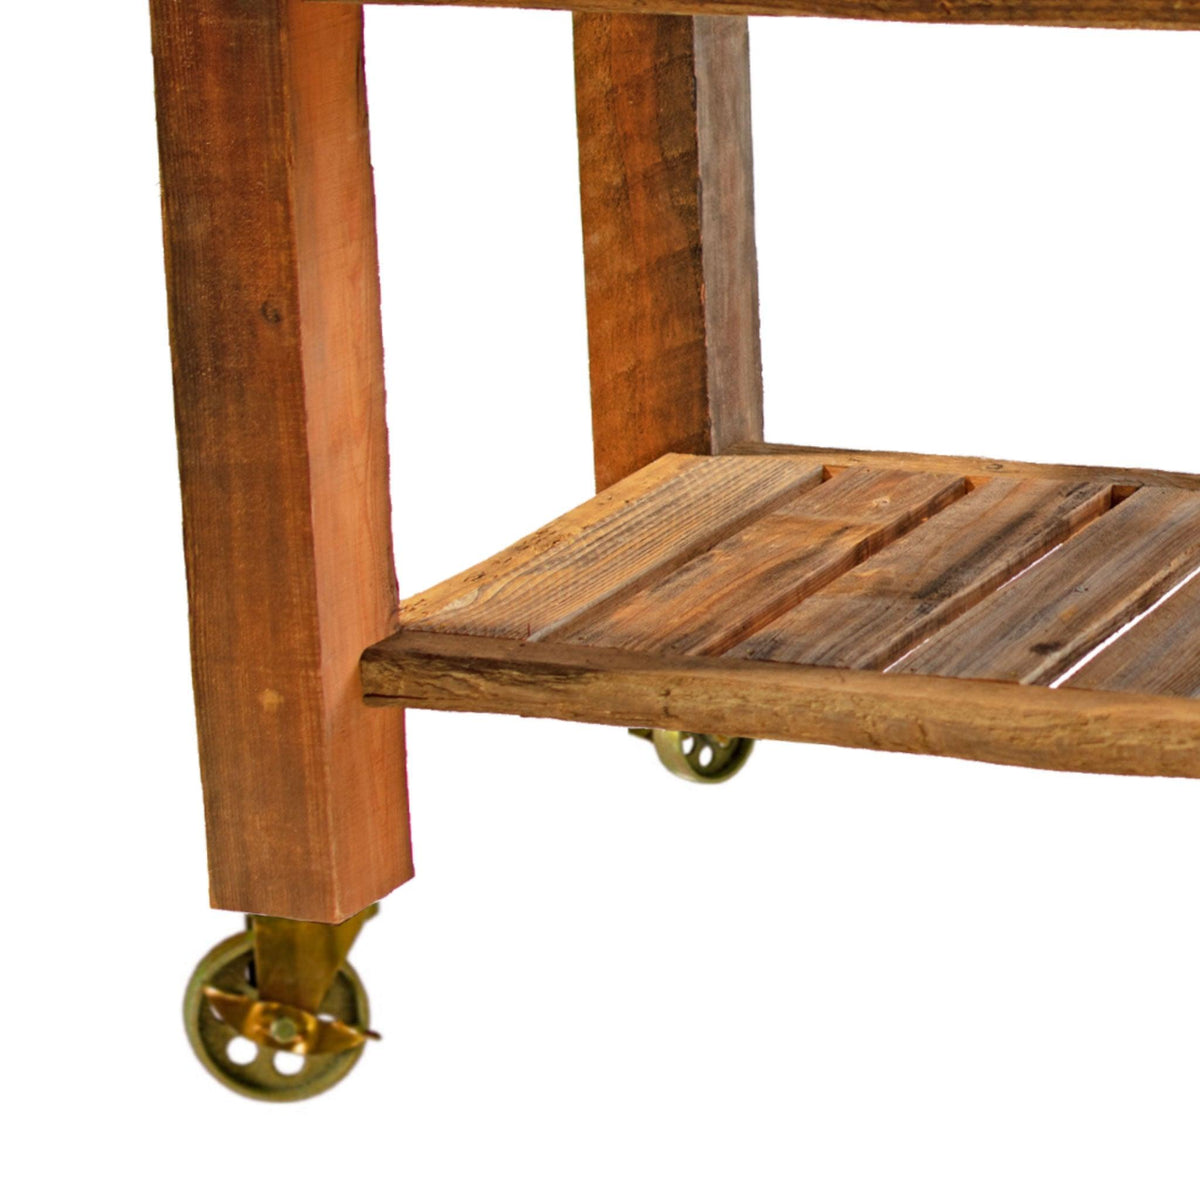 Lee Display's Redwood Potting Table Rolling Cart with 5in Gold Swivel Metal Casters and Hardware on sale now at leedisplay.com